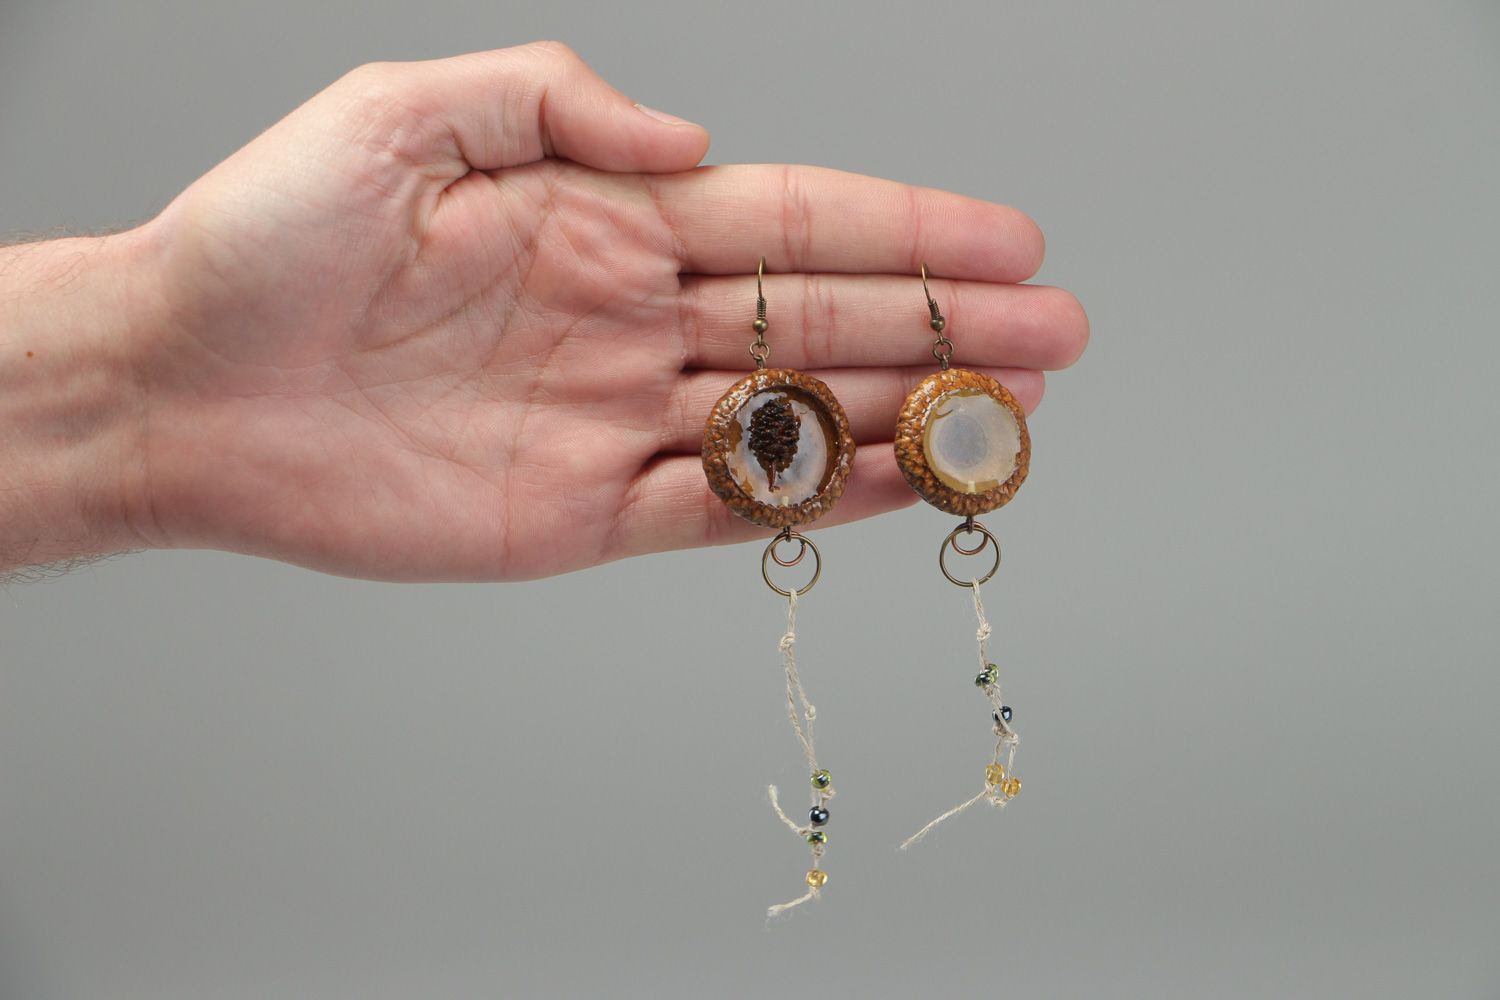 Handmade dangle earrings made of natural materials coated with epoxy resin photo 4